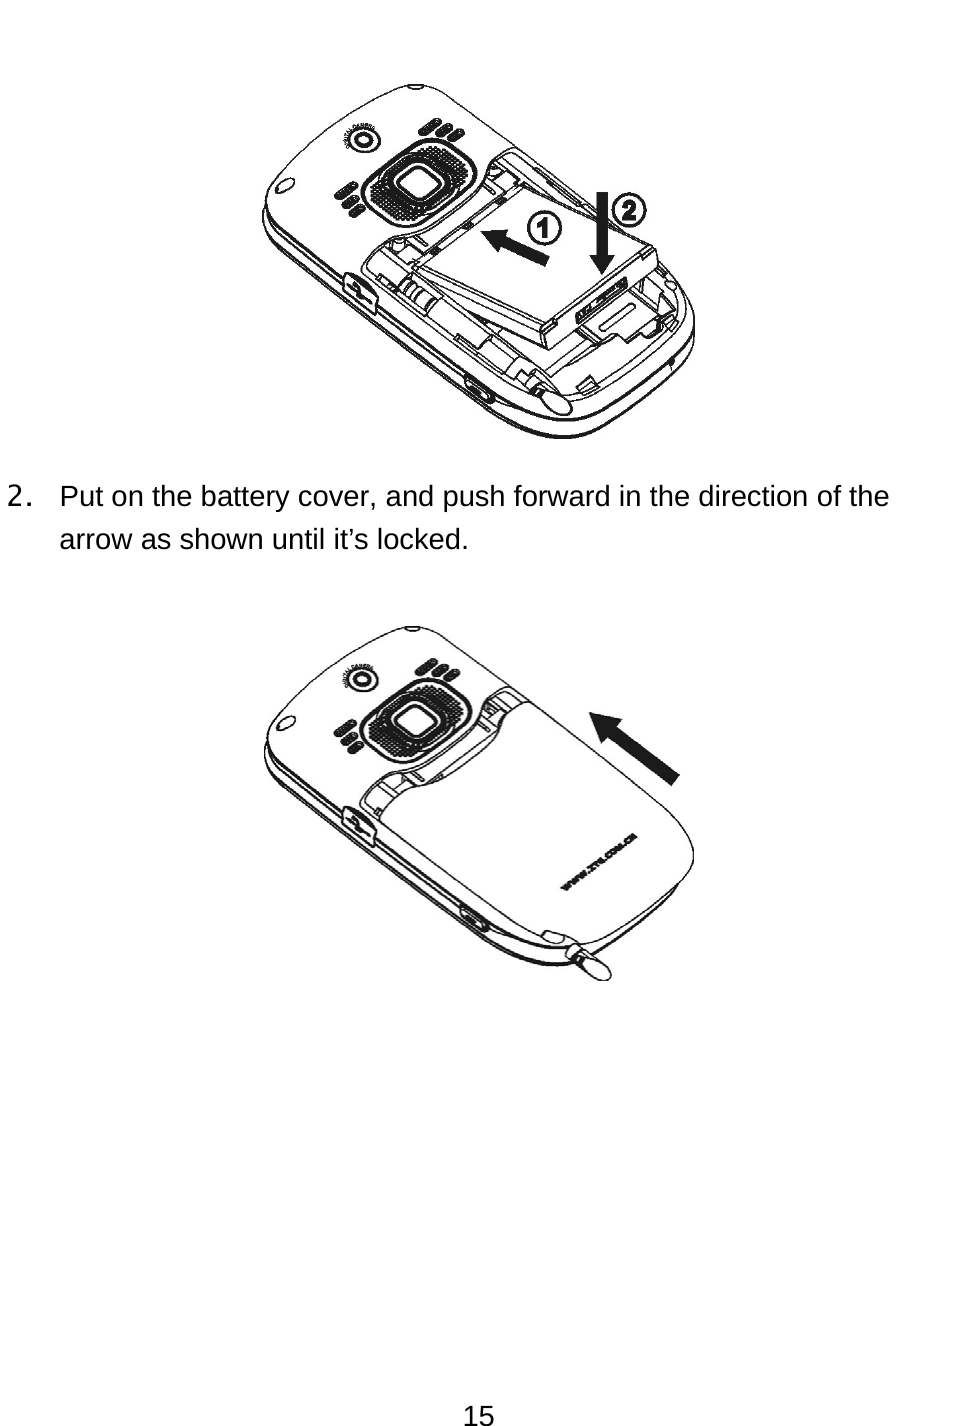  15  2.  Put on the battery cover, and push forward in the direction of the arrow as shown until it’s locked.  